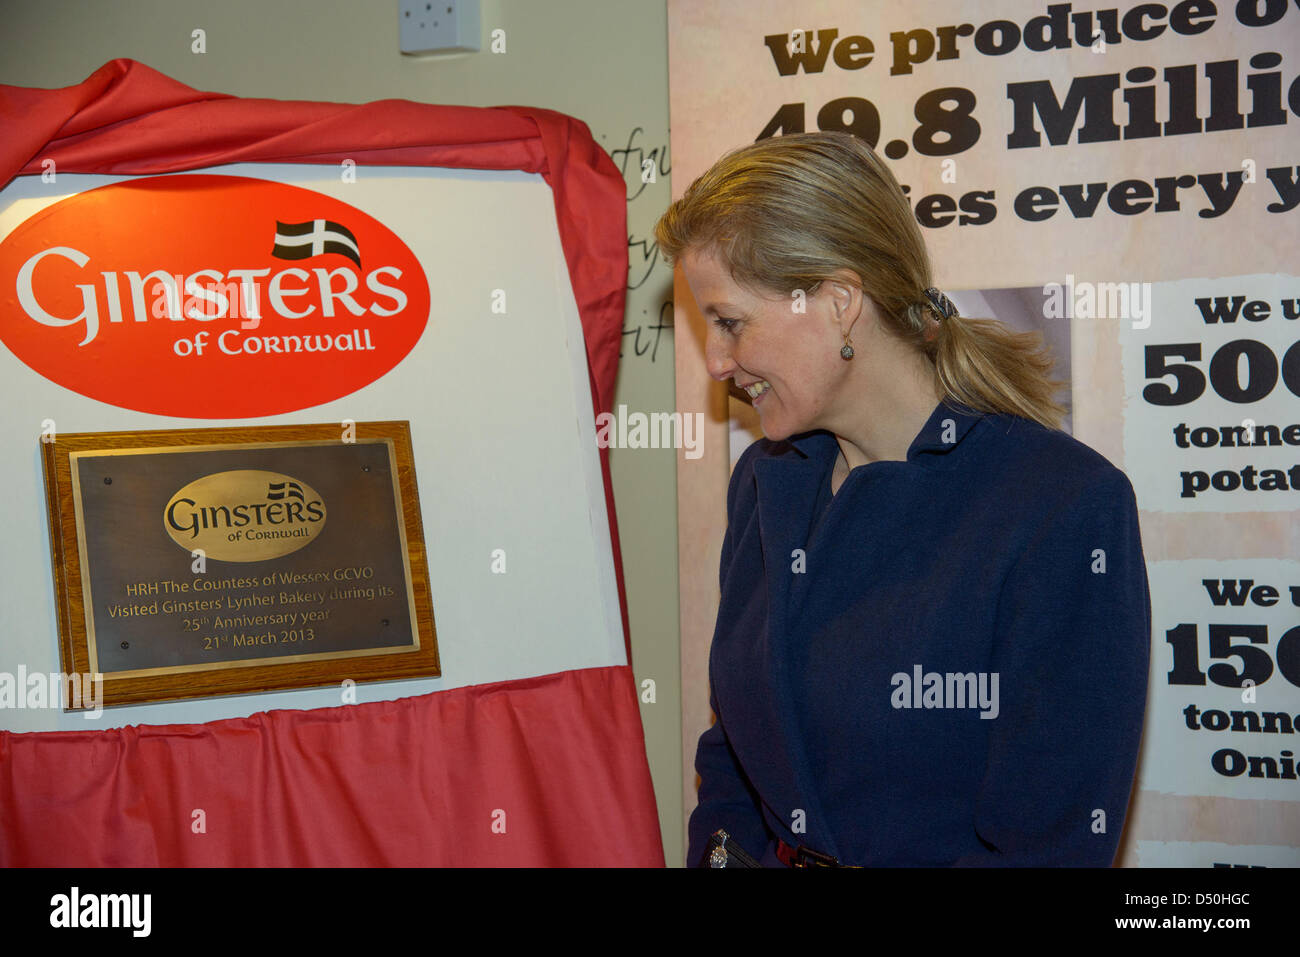 Callington, Cornwall, UK. 21st March 2013. Visit of Countess of Wessex unveiling plaque to celebrate 25th anniversary of Ginsters Callington.  Credit:  Sean Hernon / Alamy Live News Stock Photo